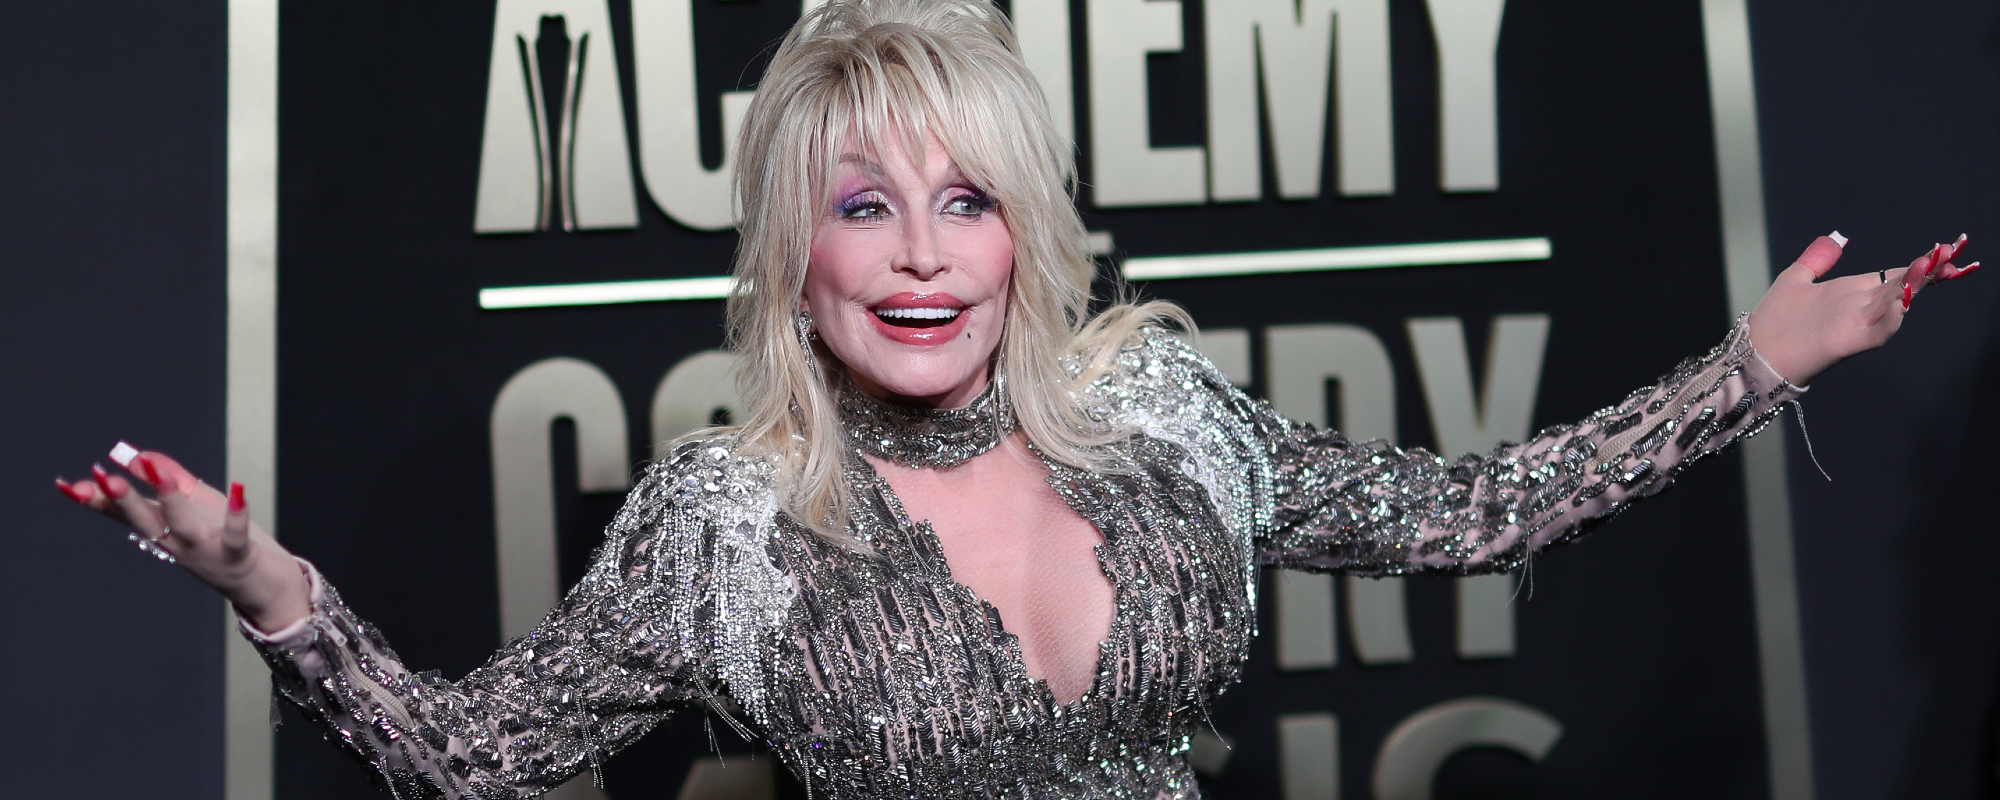 Dolly Parton Admits Husband Was “Jealous” of NFL Cheerleader Outfit: “A Little Too Short”